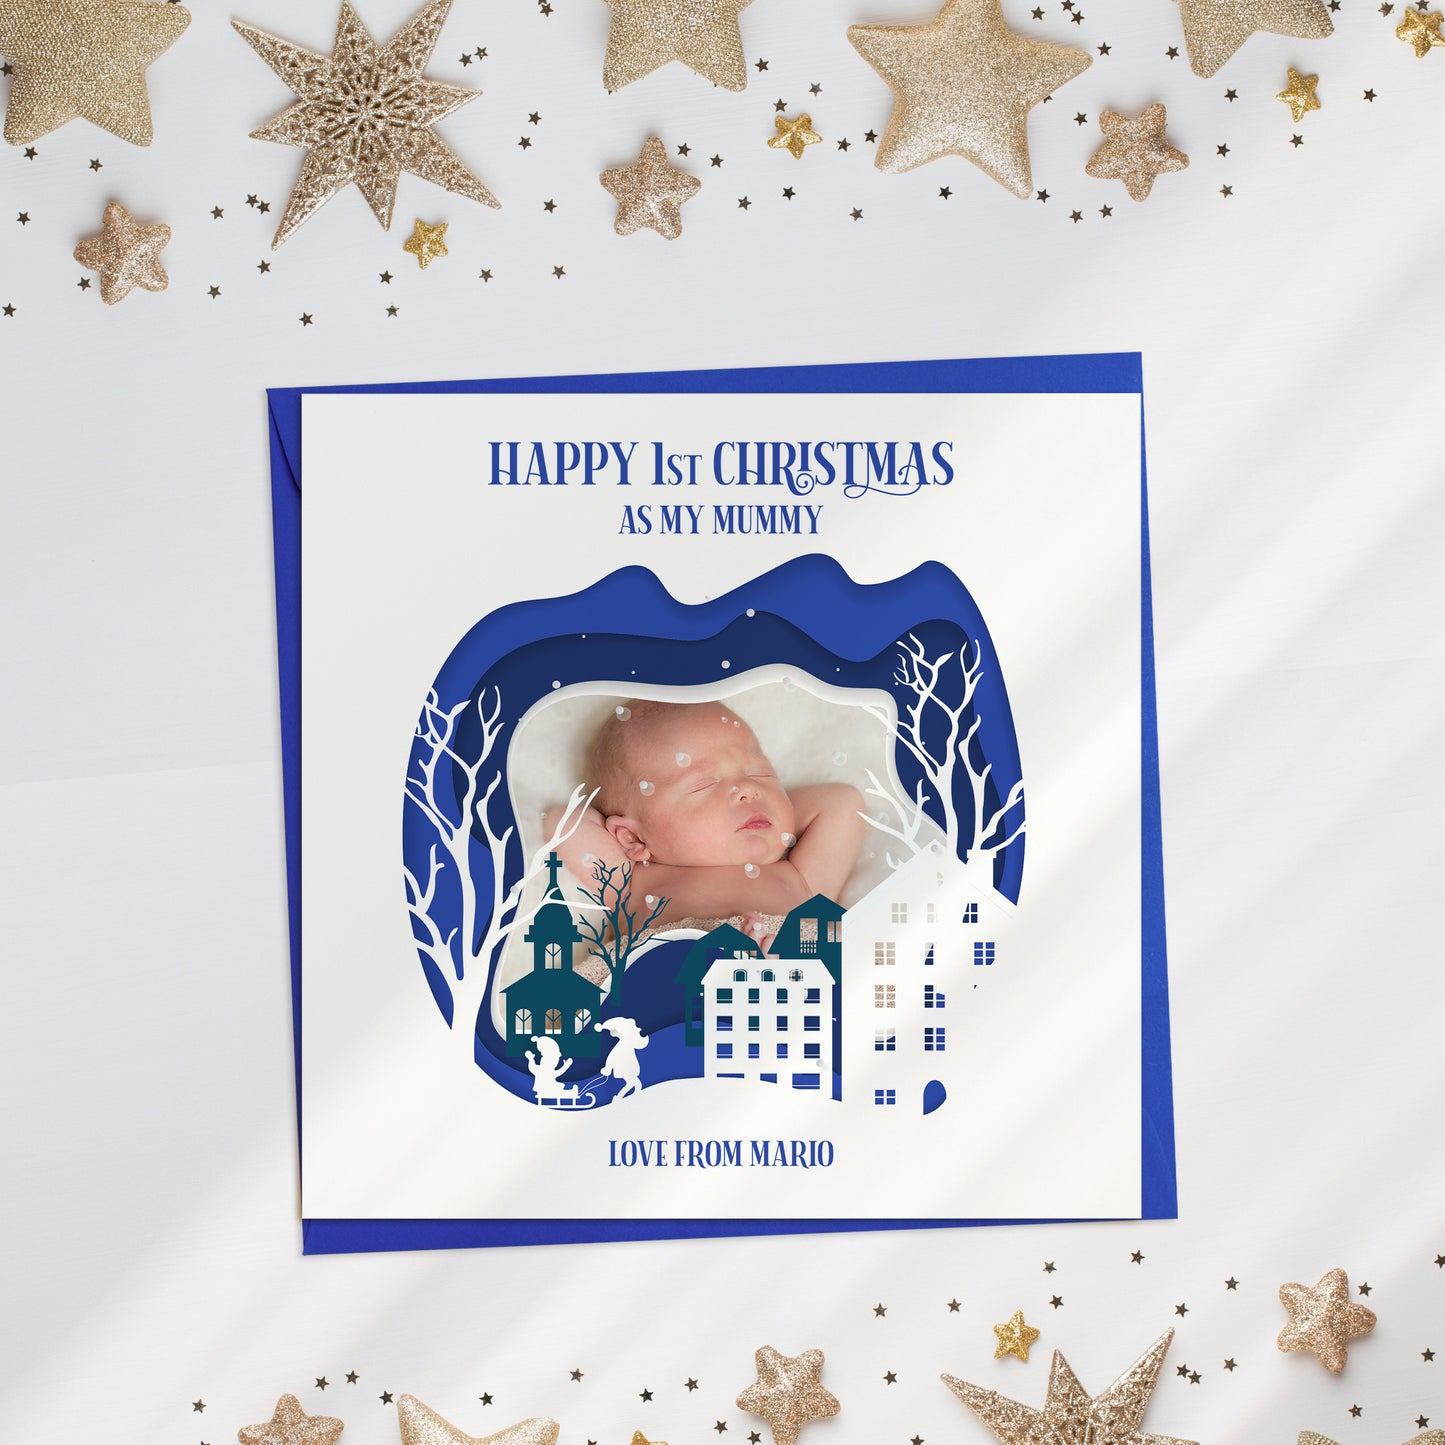 Personalised Christmas Card for Mum